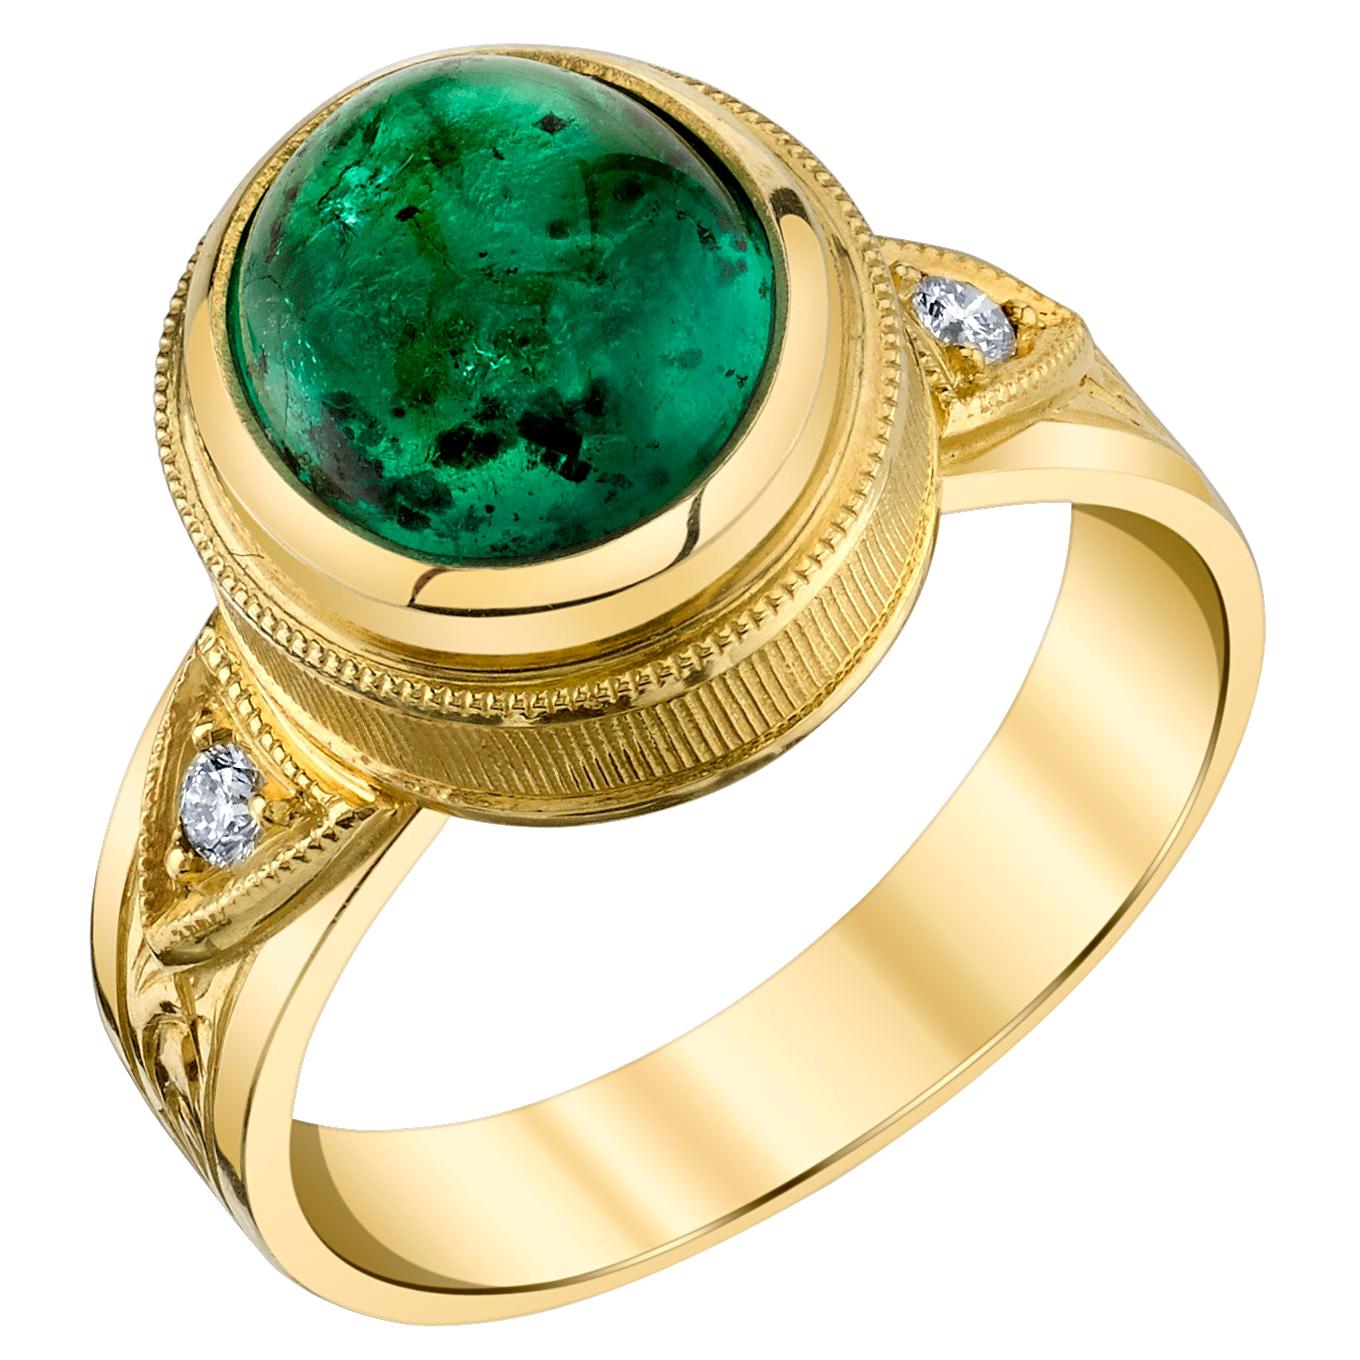 Emerald Cabochon and Diamond Hand Engraved 18k Yellow Gold Ring, 3.57 Carats